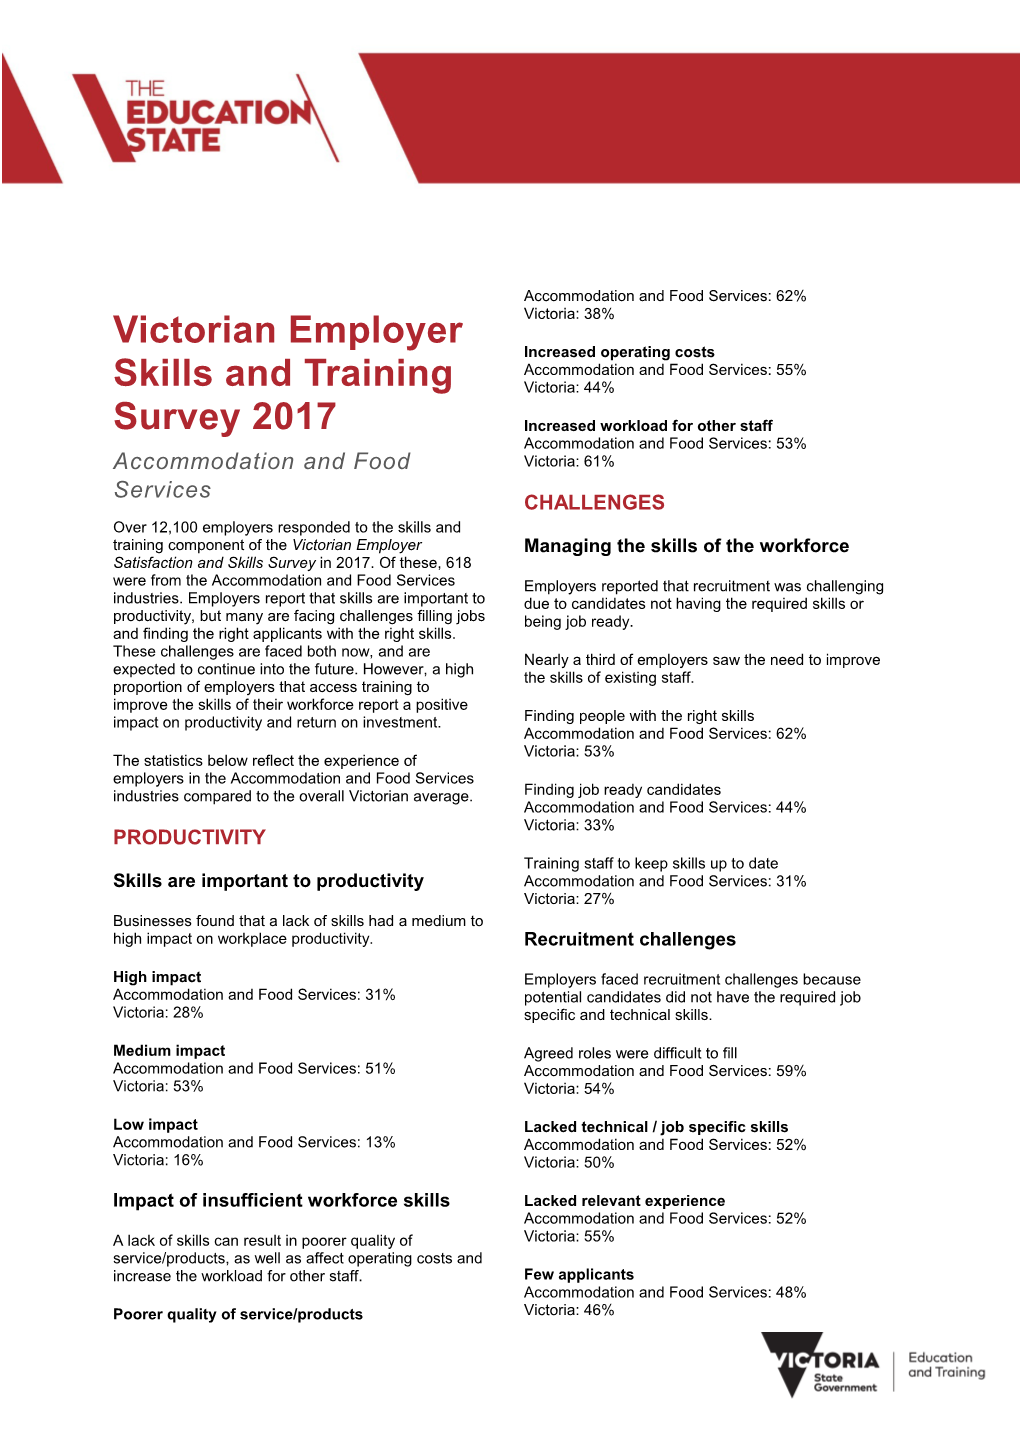 Victorian Skills & Training Employer Survey 2017 Infographic Accessible Accommodation